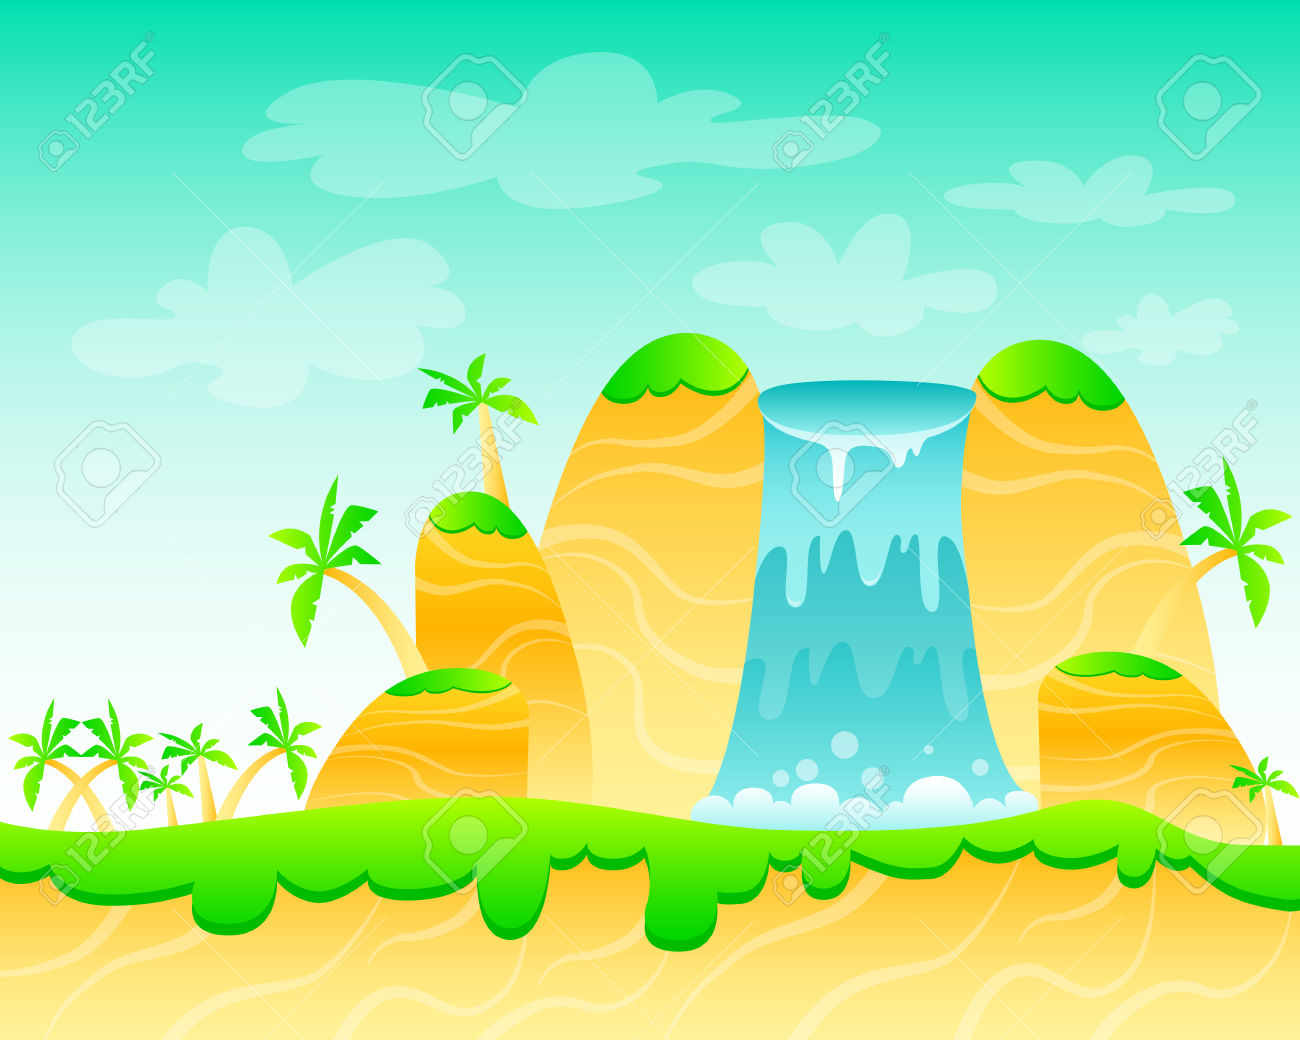 free clipart images waterfalls - photo #43